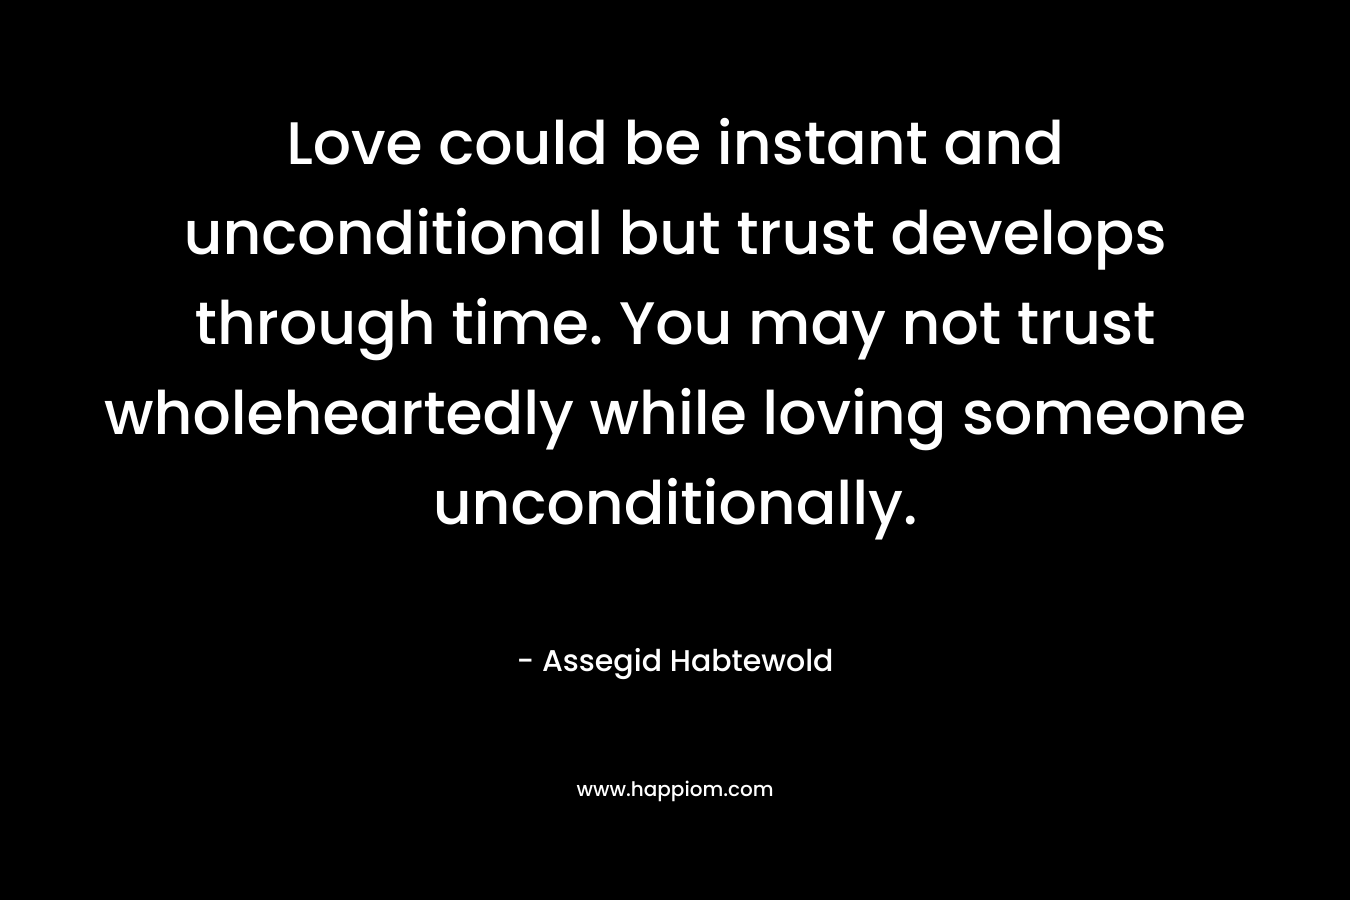 Love could be instant and unconditional but trust develops through time. You may not trust wholeheartedly while loving someone unconditionally.